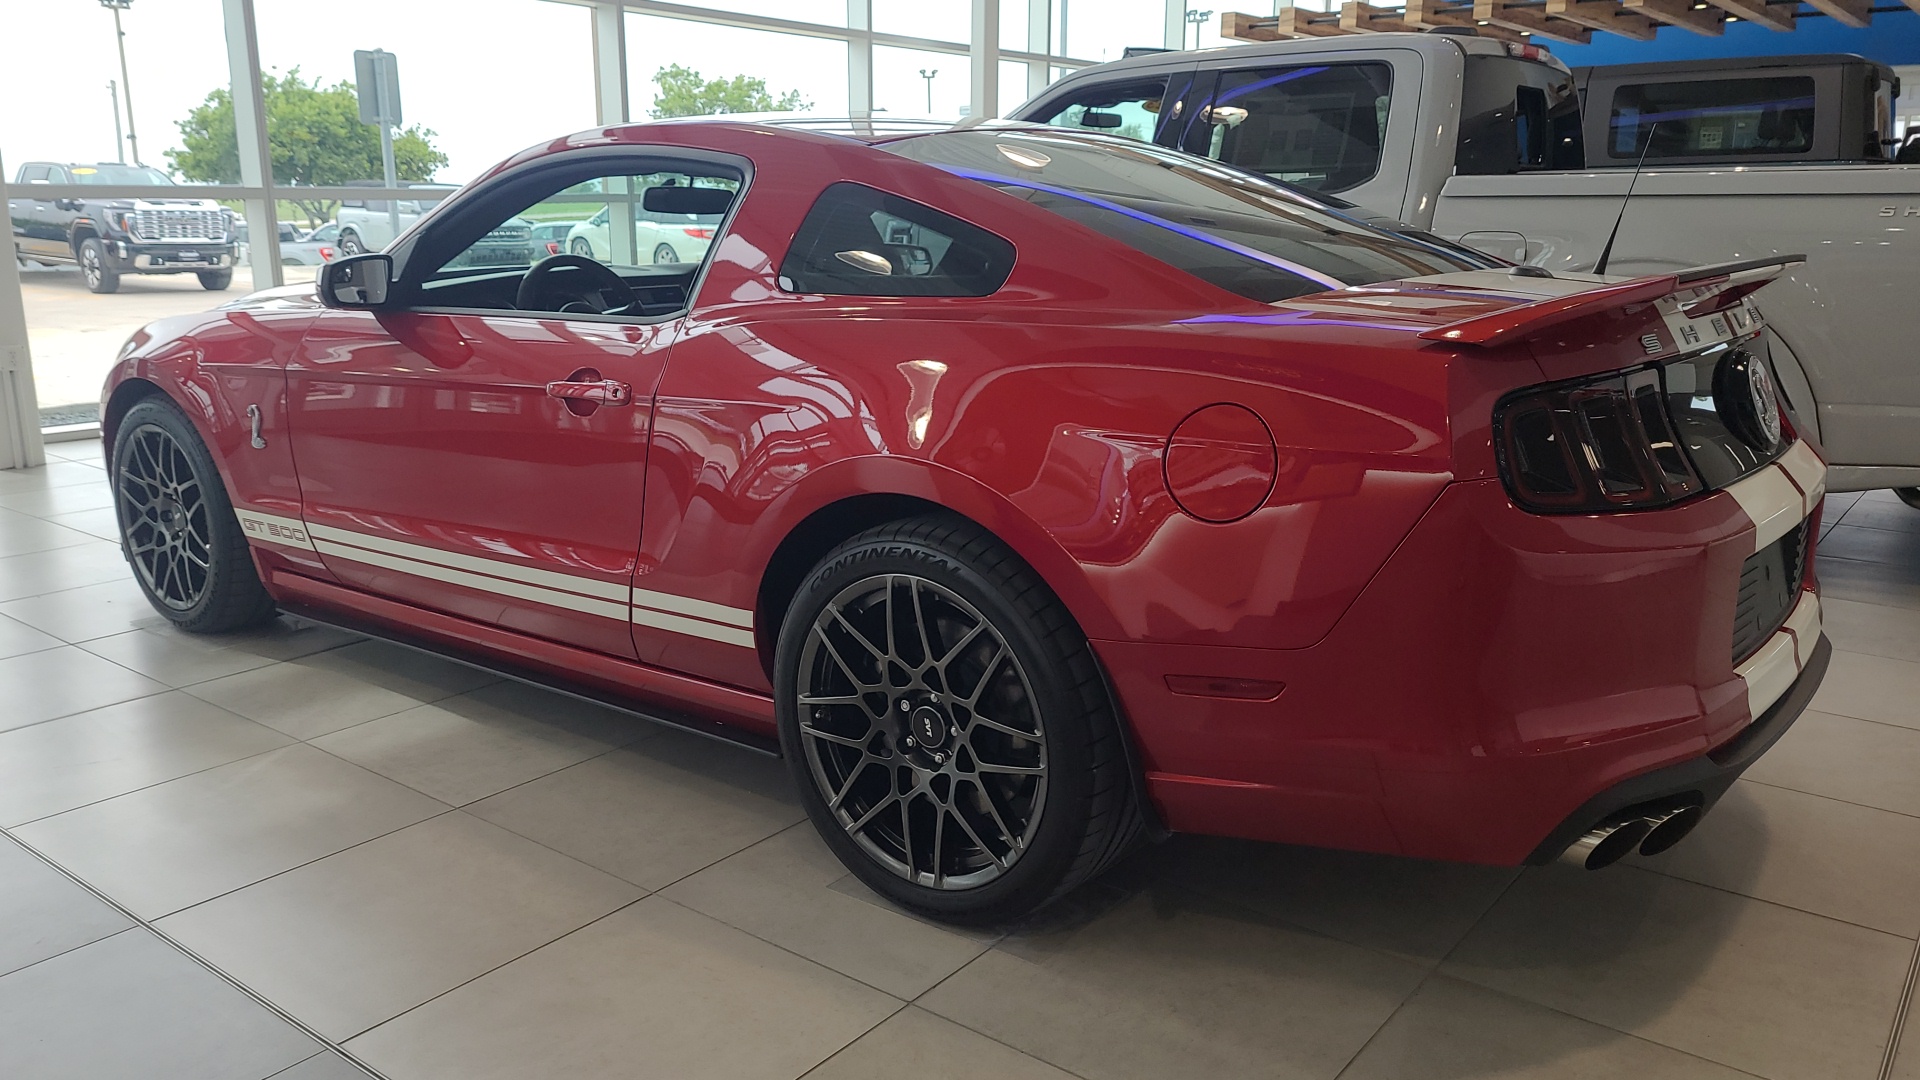 2013 Ford Mustang Shelby GT500 4